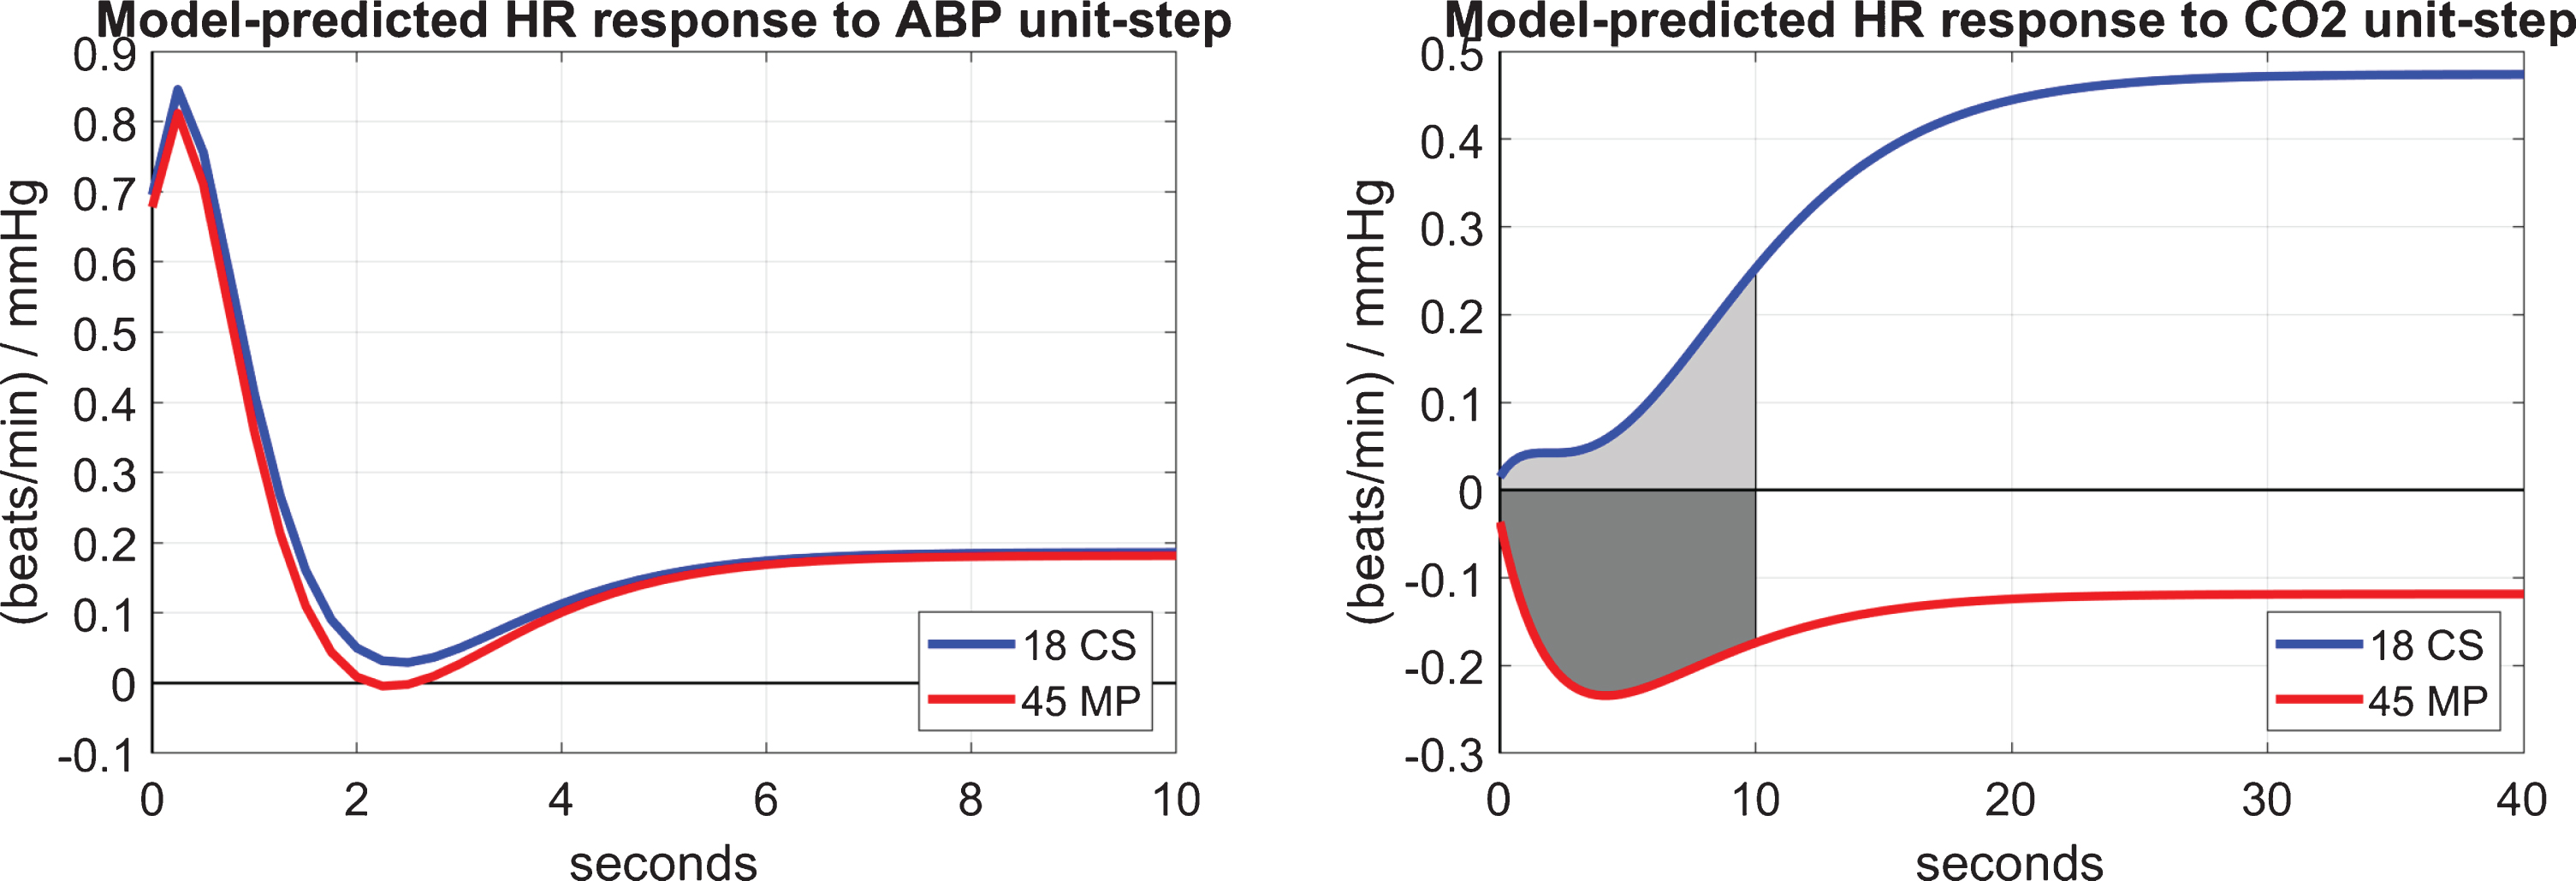 The average model-predicted HR responses (in beats/min) to a unit-step ABP input (left panel) and CO2 input (right panel) over 18 CS (blue line) and 45 MP (red line) that illustrate the average time-course of the baroreflex and CO2-driven heart-rate chemoreflex effects, respectively. The CRG index for each CS or MP is defined as the time-average of the shaded area of the HR unit-response (indicated on the right panel). The BRG index for each CS or MP is defined as the difference between the peak and the trough of the HR unit-response (shown on the left panel for the average kernels).